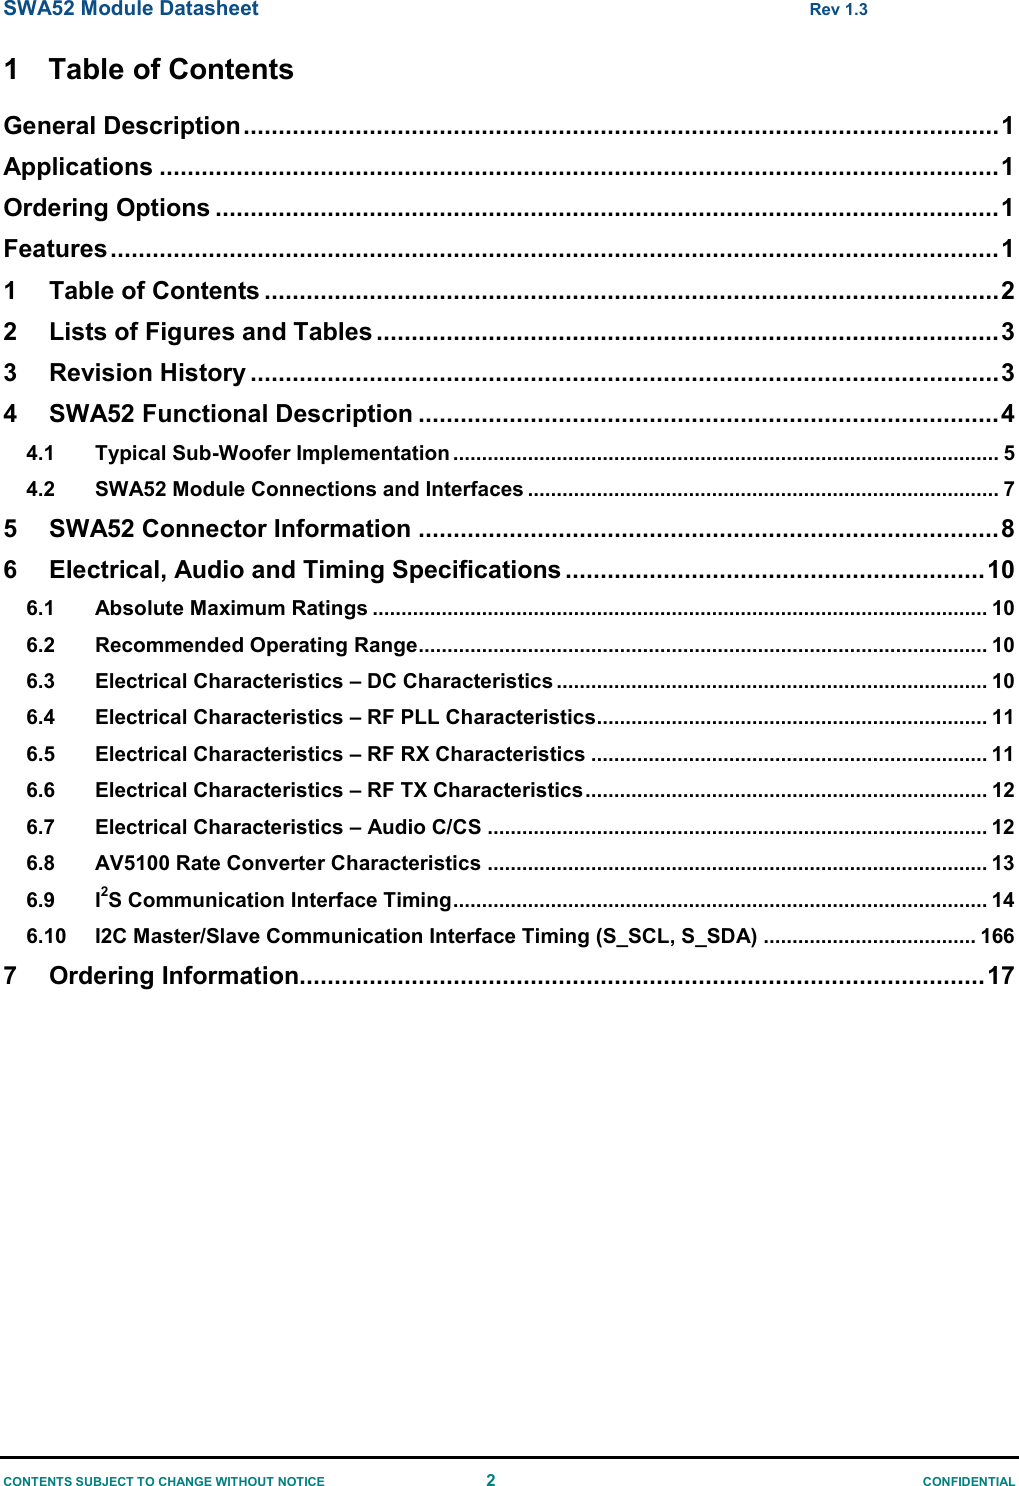 SWA52 Module Datasheet  Rev 1.3 CONTENTS SUBJECT TO CHANGE WITHOUT NOTICE  2  CONFIDENTIAL 1  Table of Contents General Description ............................................................................................................ 1 Applications ........................................................................................................................ 1 Ordering Options ................................................................................................................ 1 Features ............................................................................................................................... 1 1 Table of Contents ......................................................................................................... 2 2 Lists of Figures and Tables ......................................................................................... 3 3 Revision History ........................................................................................................... 3 4 SWA52 Functional Description ................................................................................... 4 4.1 Typical Sub-Woofer Implementation ............................................................................................... 5 4.2 SWA52 Module Connections and Interfaces .................................................................................. 7 5 SWA52 Connector Information ................................................................................... 8 6 Electrical, Audio and Timing Specifications ............................................................ 10 6.1 Absolute Maximum Ratings ........................................................................................................... 10 6.2 Recommended Operating Range ................................................................................................... 10 6.3 Electrical Characteristics – DC Characteristics ........................................................................... 10 6.4 Electrical Characteristics – RF PLL Characteristics.................................................................... 11 6.5 Electrical Characteristics – RF RX Characteristics ..................................................................... 11 6.6 Electrical Characteristics – RF TX Characteristics ...................................................................... 12 6.7 Electrical Characteristics – Audio C/CS ....................................................................................... 12 6.8 AV5100 Rate Converter Characteristics ....................................................................................... 13 6.9 I2S Communication Interface Timing ............................................................................................. 14 6.10 I2C Master/Slave Communication Interface Timing (S_SCL, S_SDA) ..................................... 166 7 Ordering Information.................................................................................................. 17                